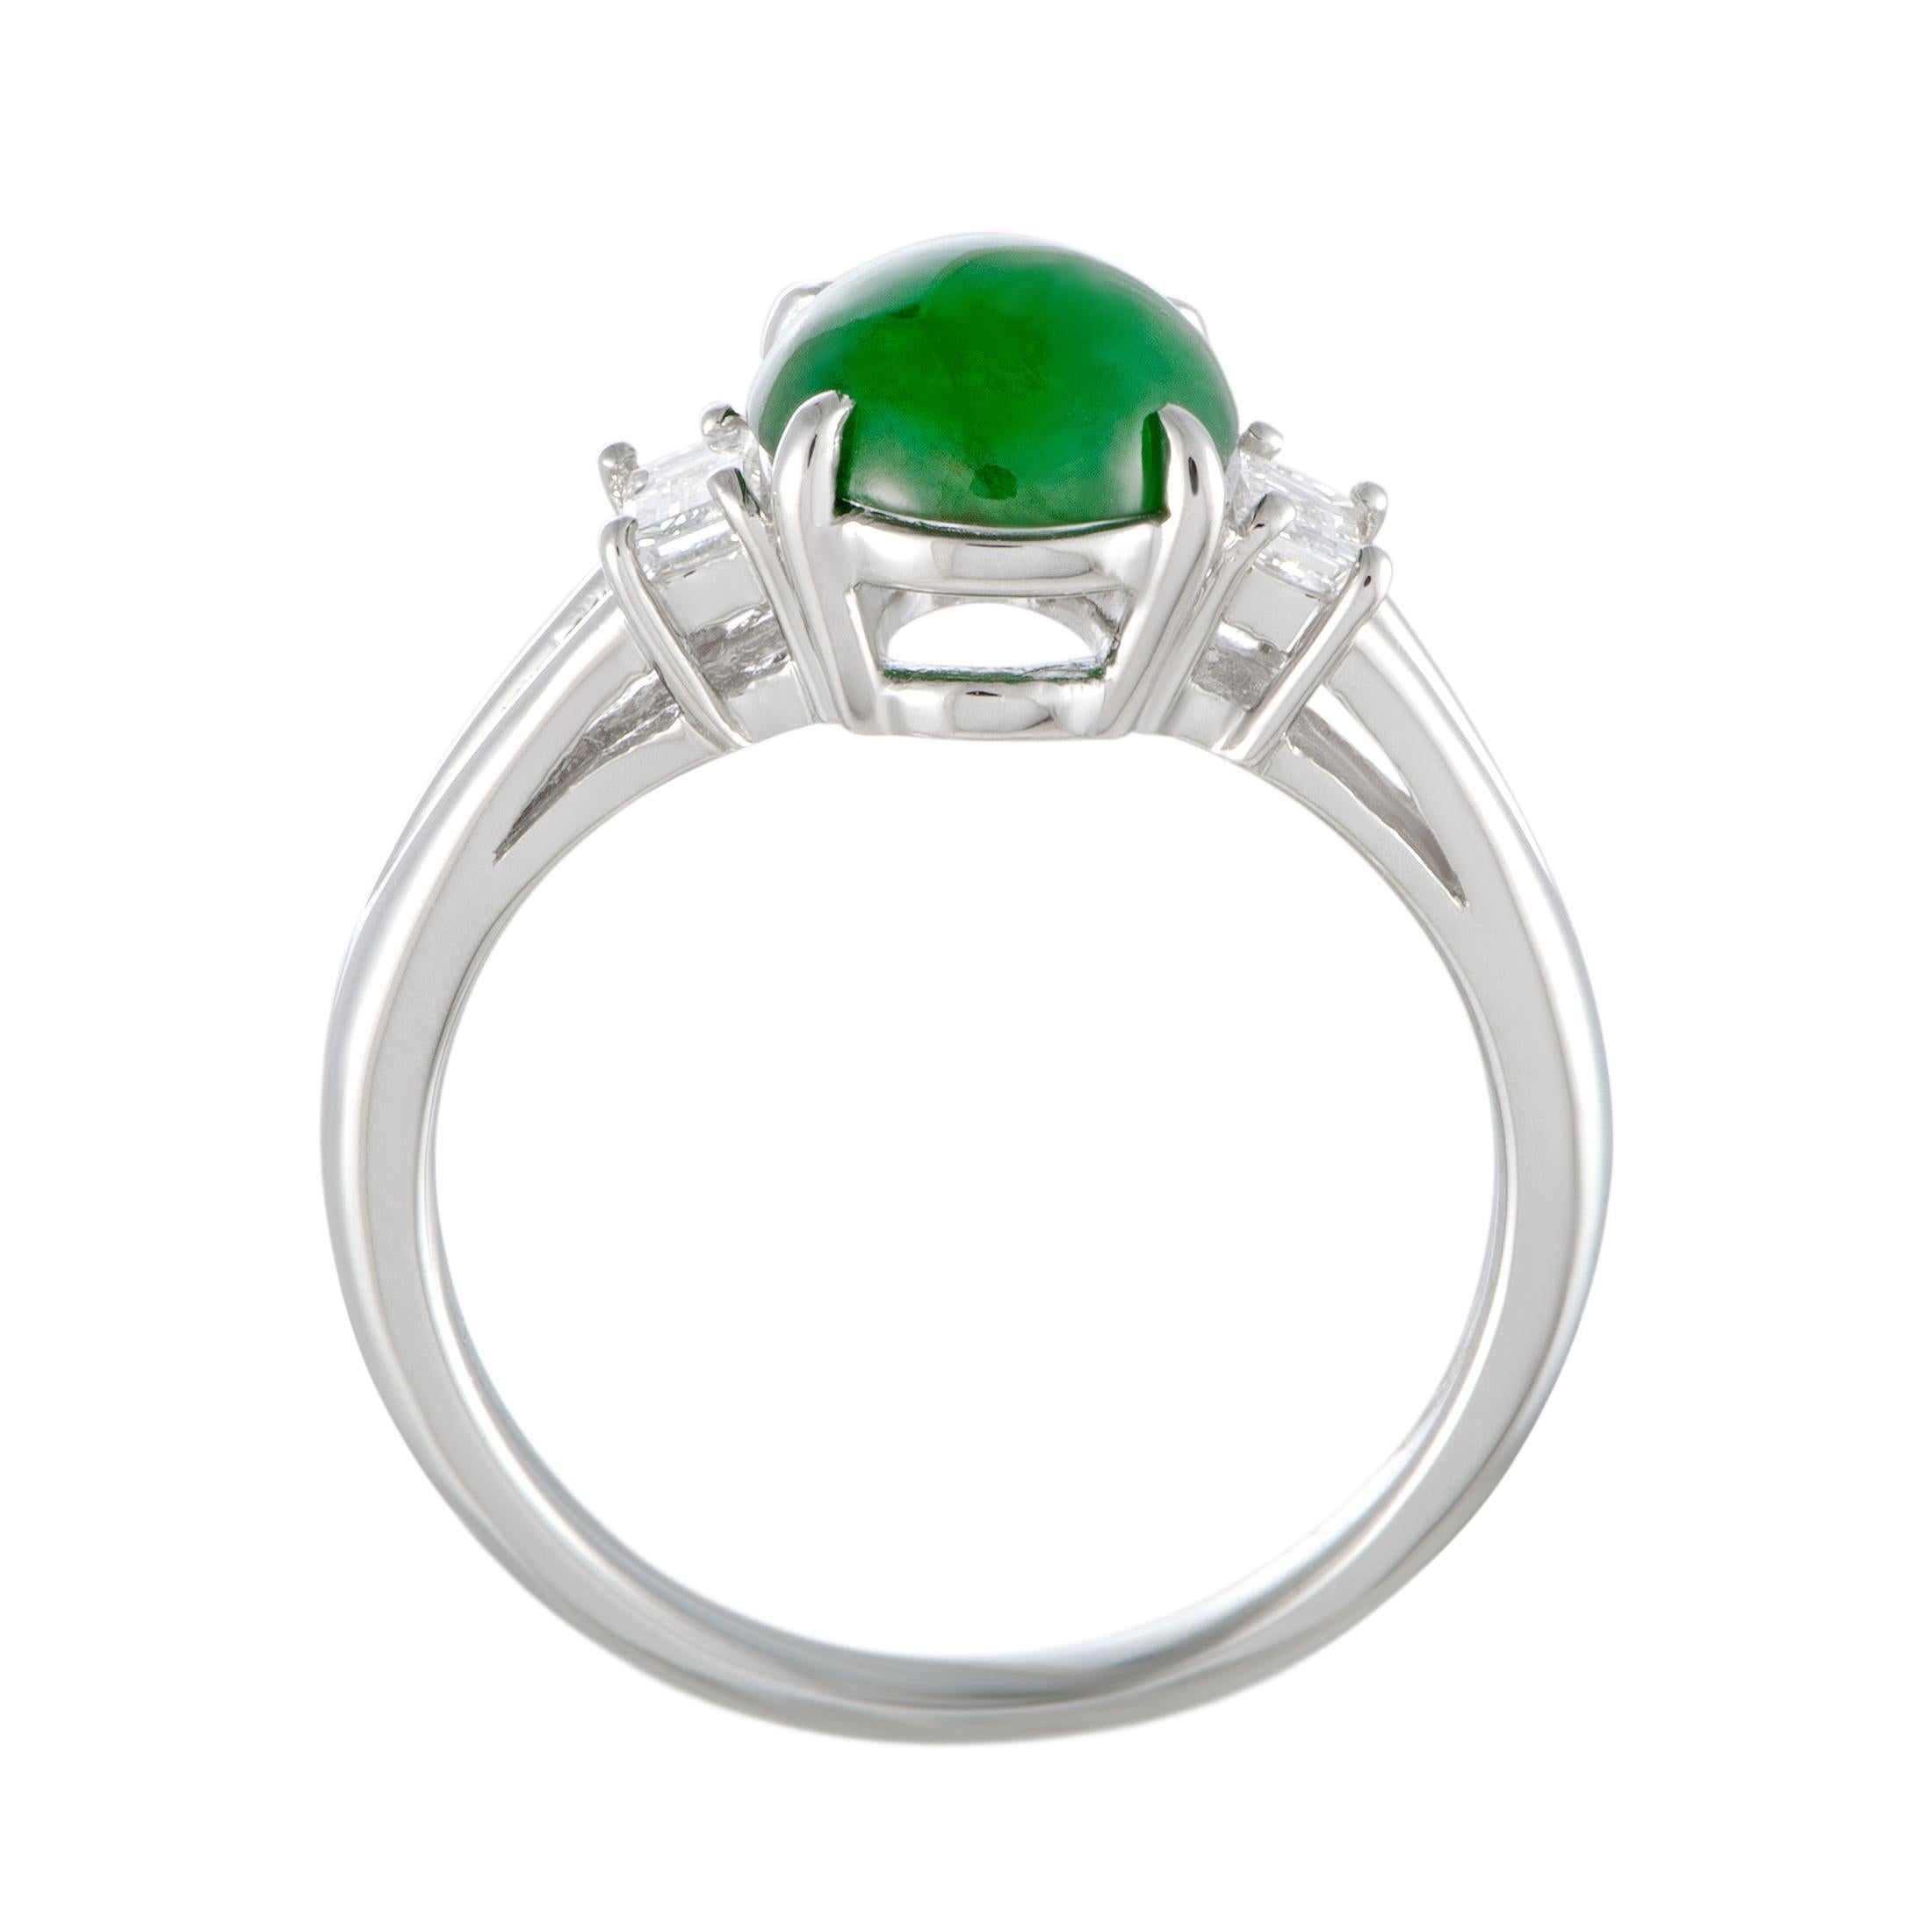 This gorgeous platinum ring offers a delightfully feminine appearance thanks to the exceptionally elegant design that is topped off with stunning gems. The center stone of the ring is an eye-catching green jade that weighs 1.97 carats and is